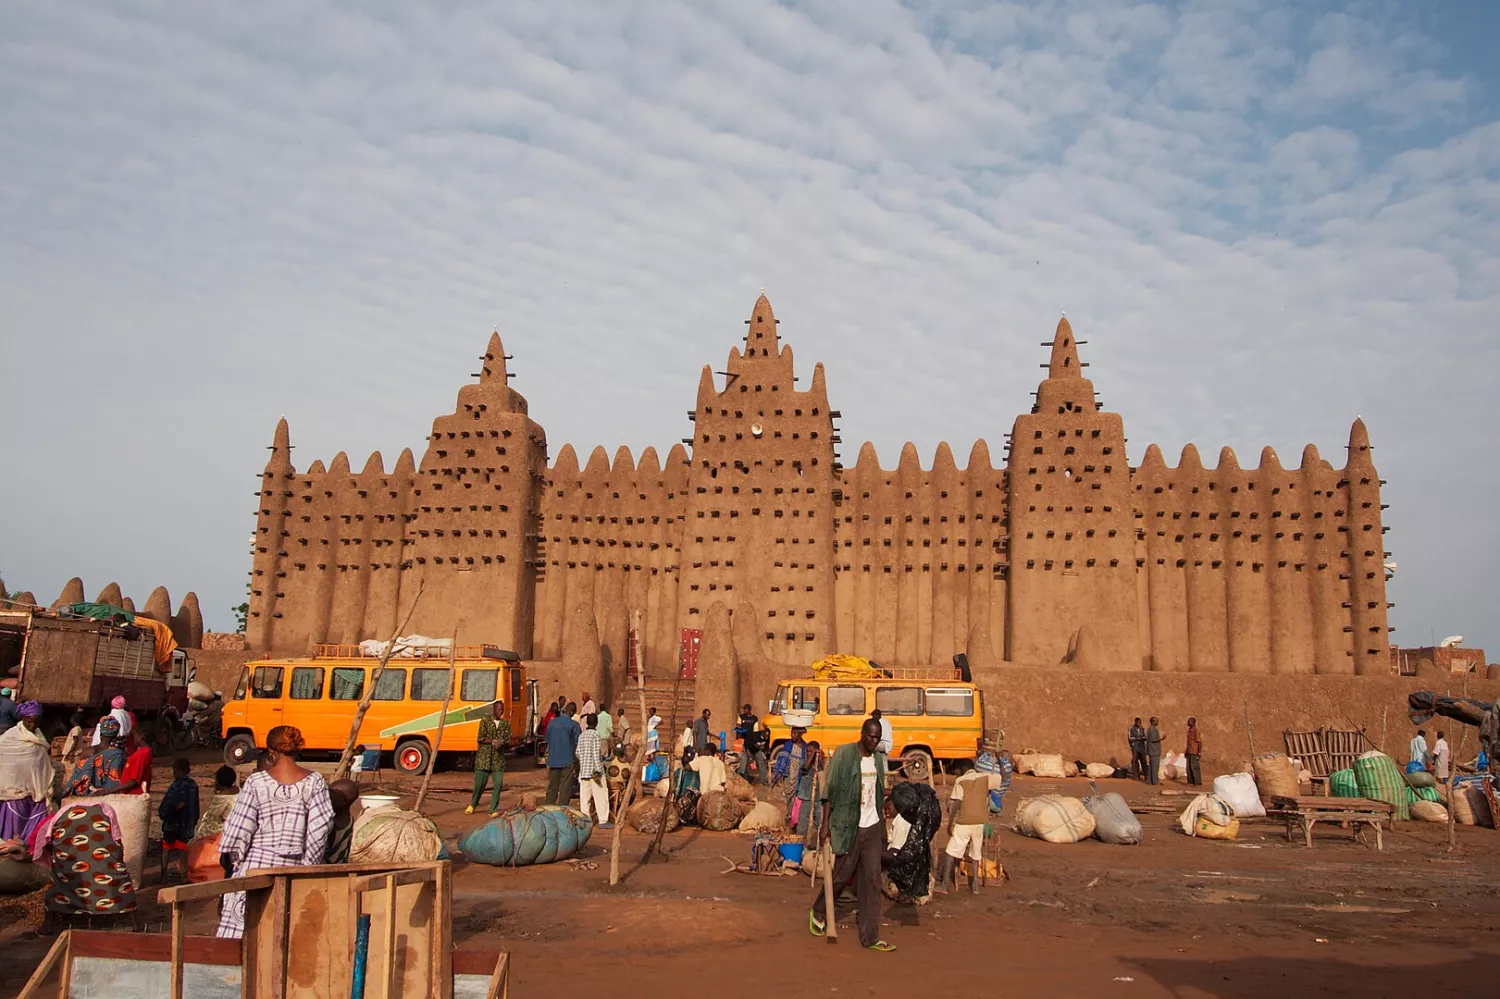 Great Mosque of Djenné - Mali